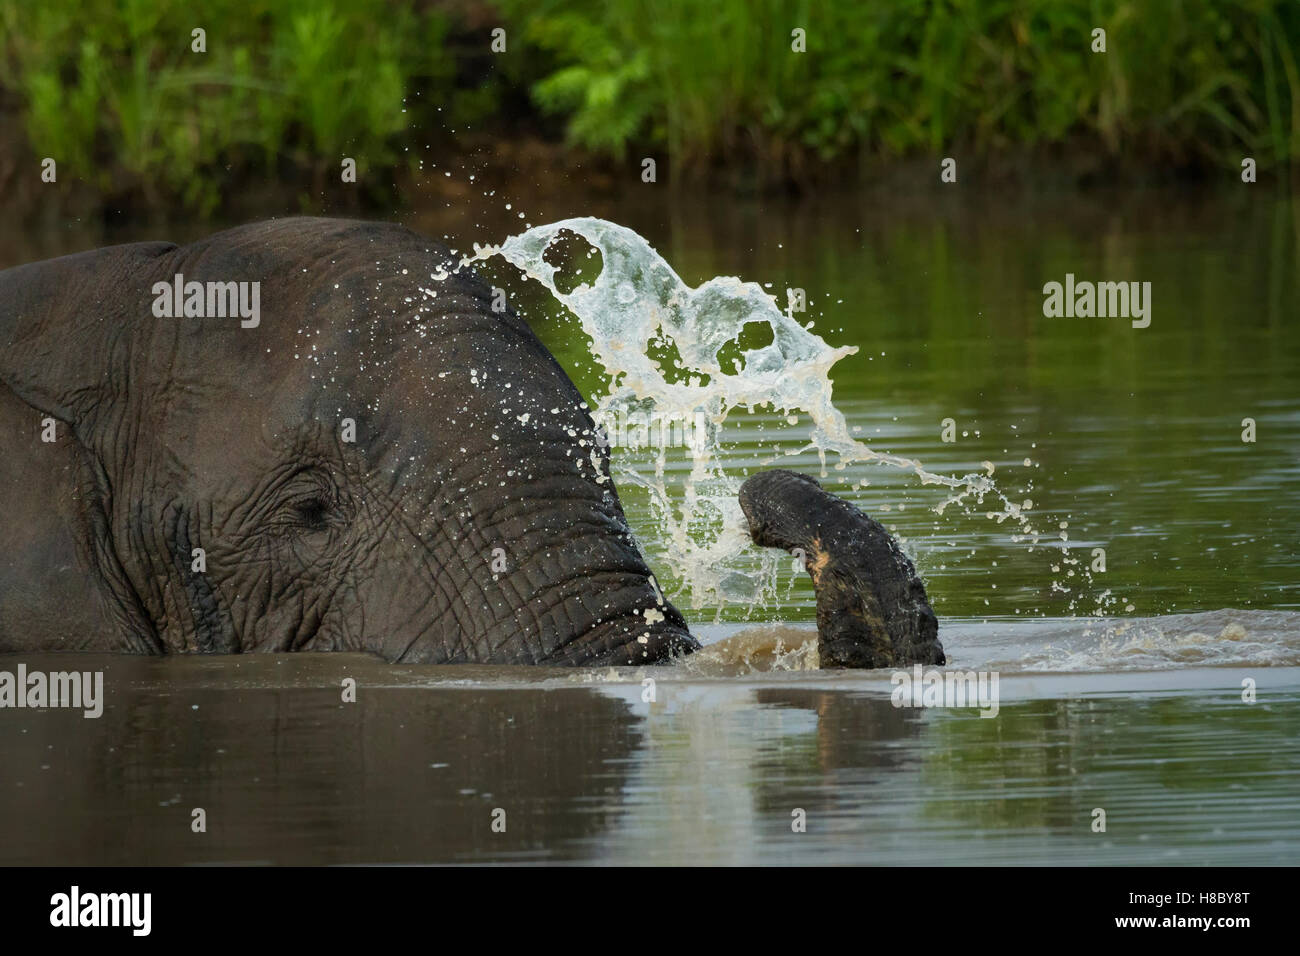 Portrait of an African elephant submerged in water in water spraying water with its trunk Stock Photo